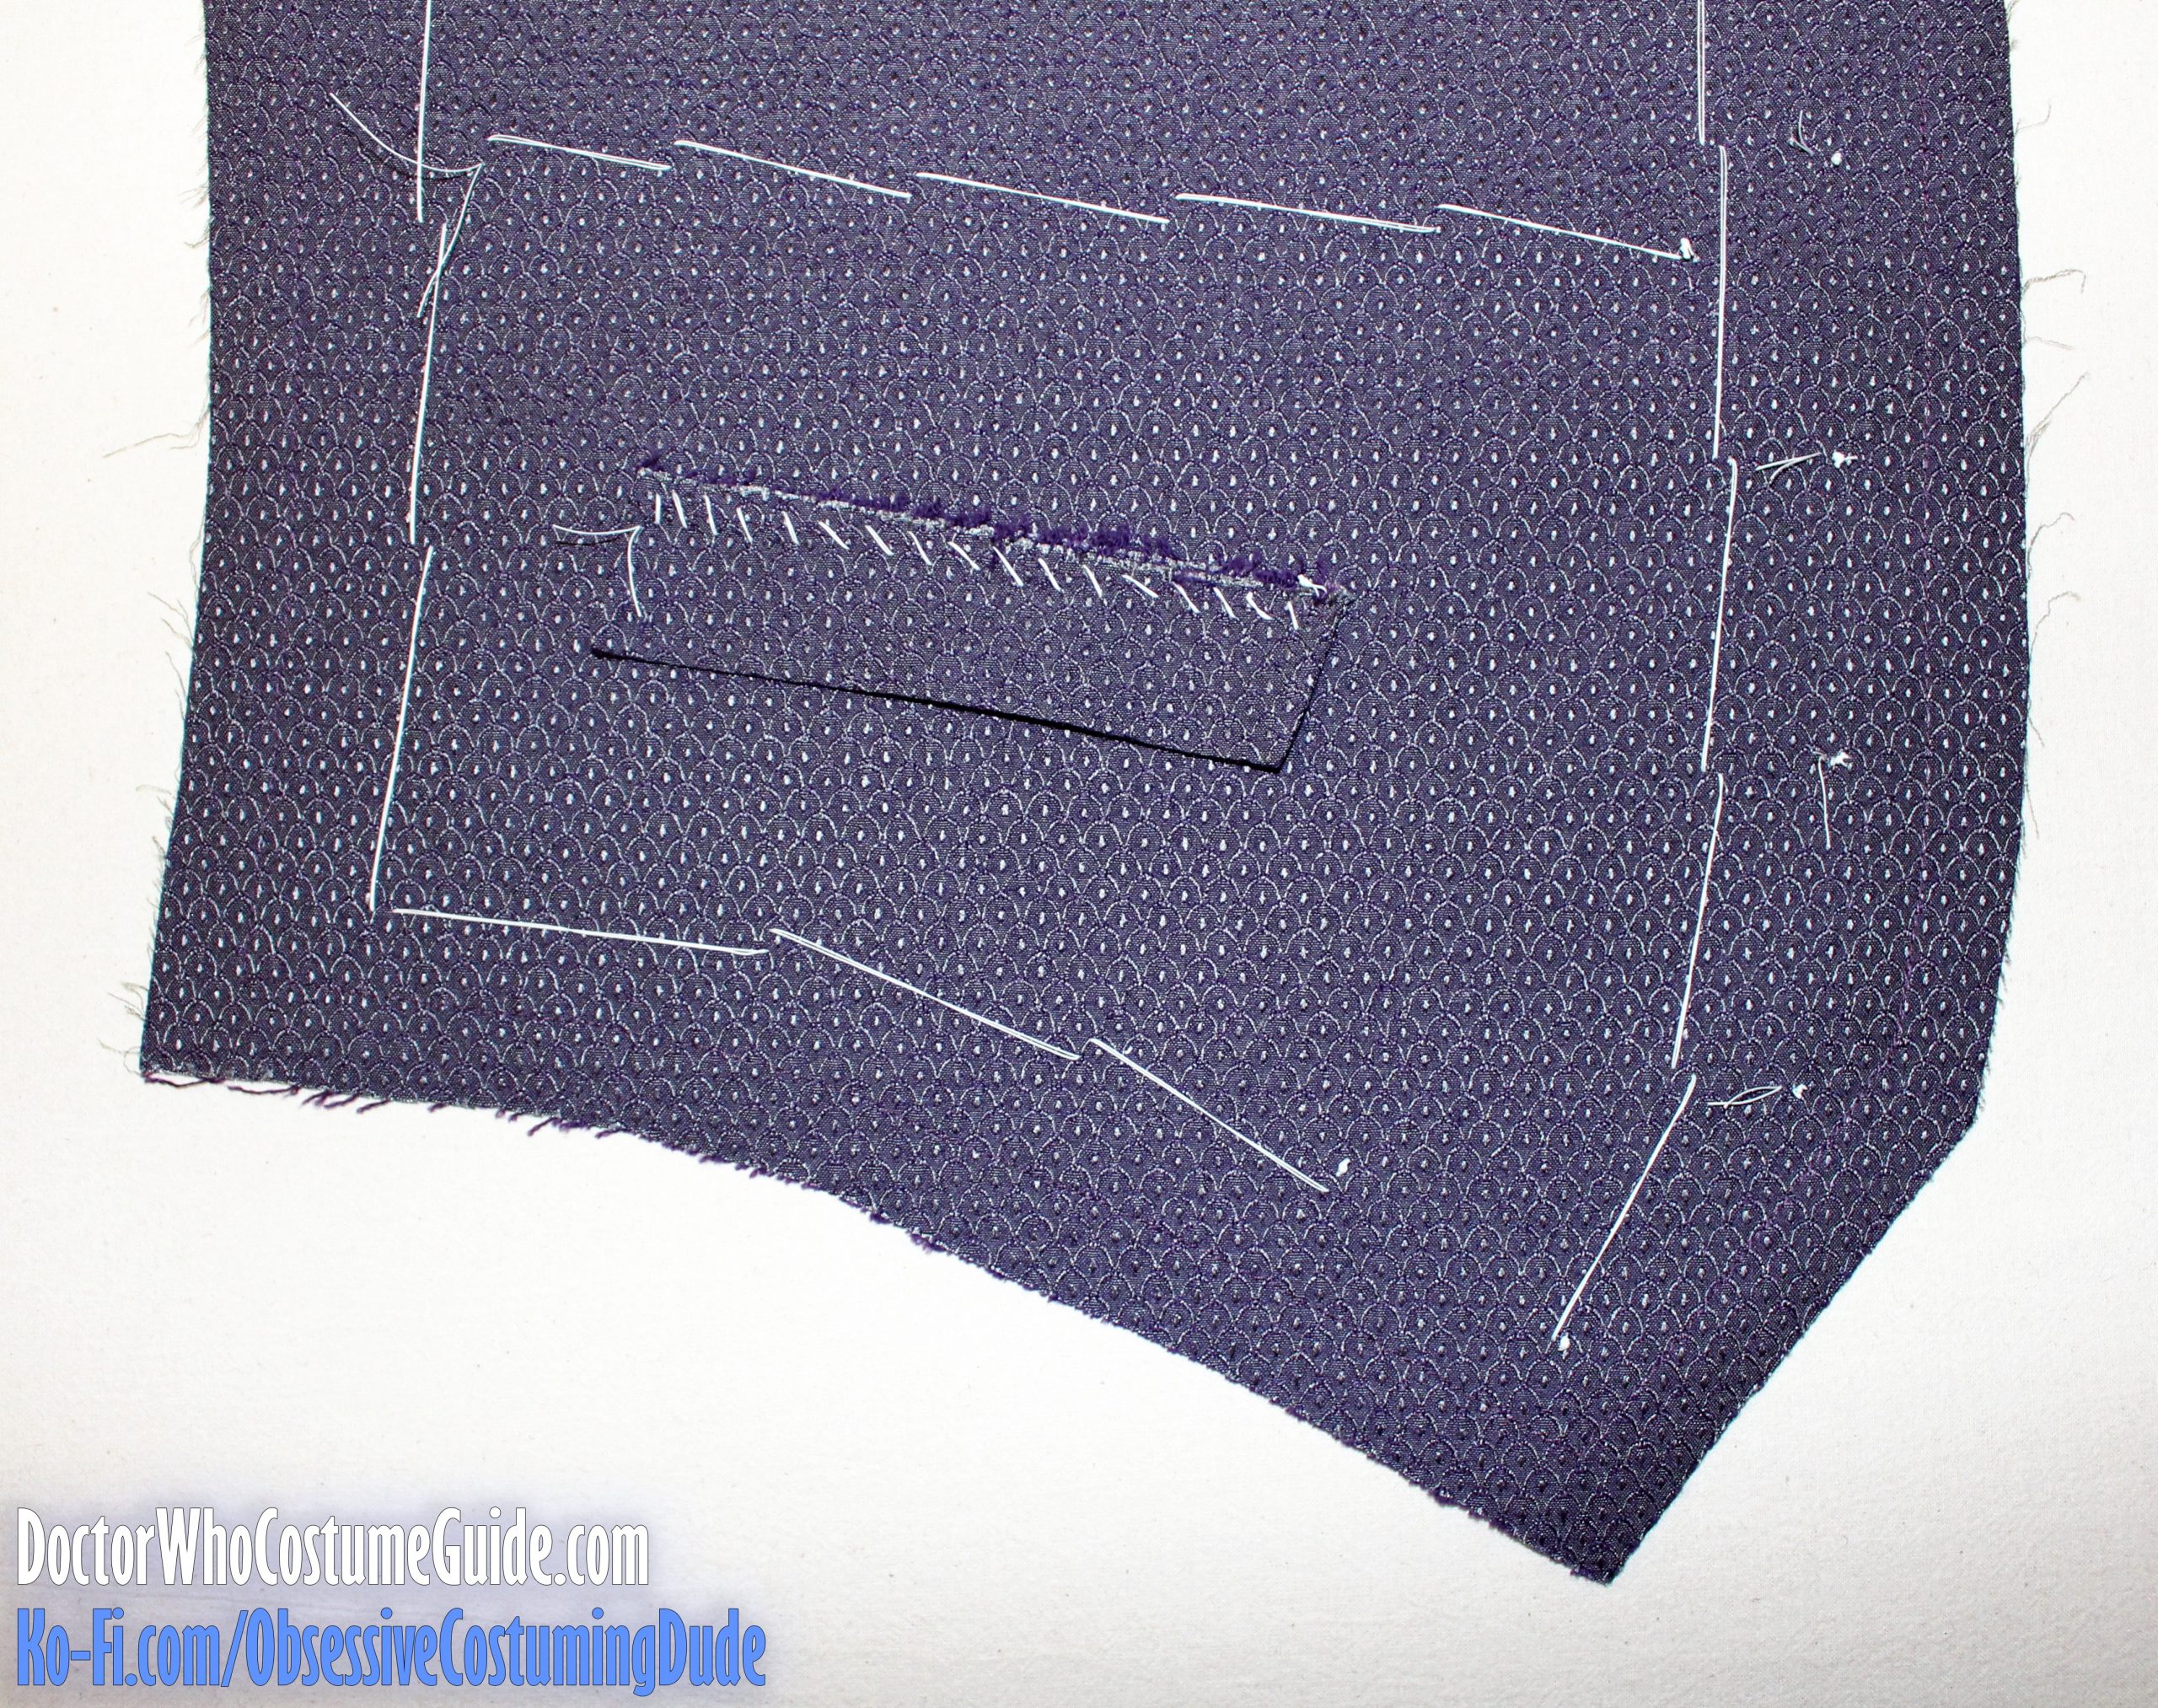 11th Doctor "scales" waistcoat sewing tutorial - Doctor Who Costume Guide